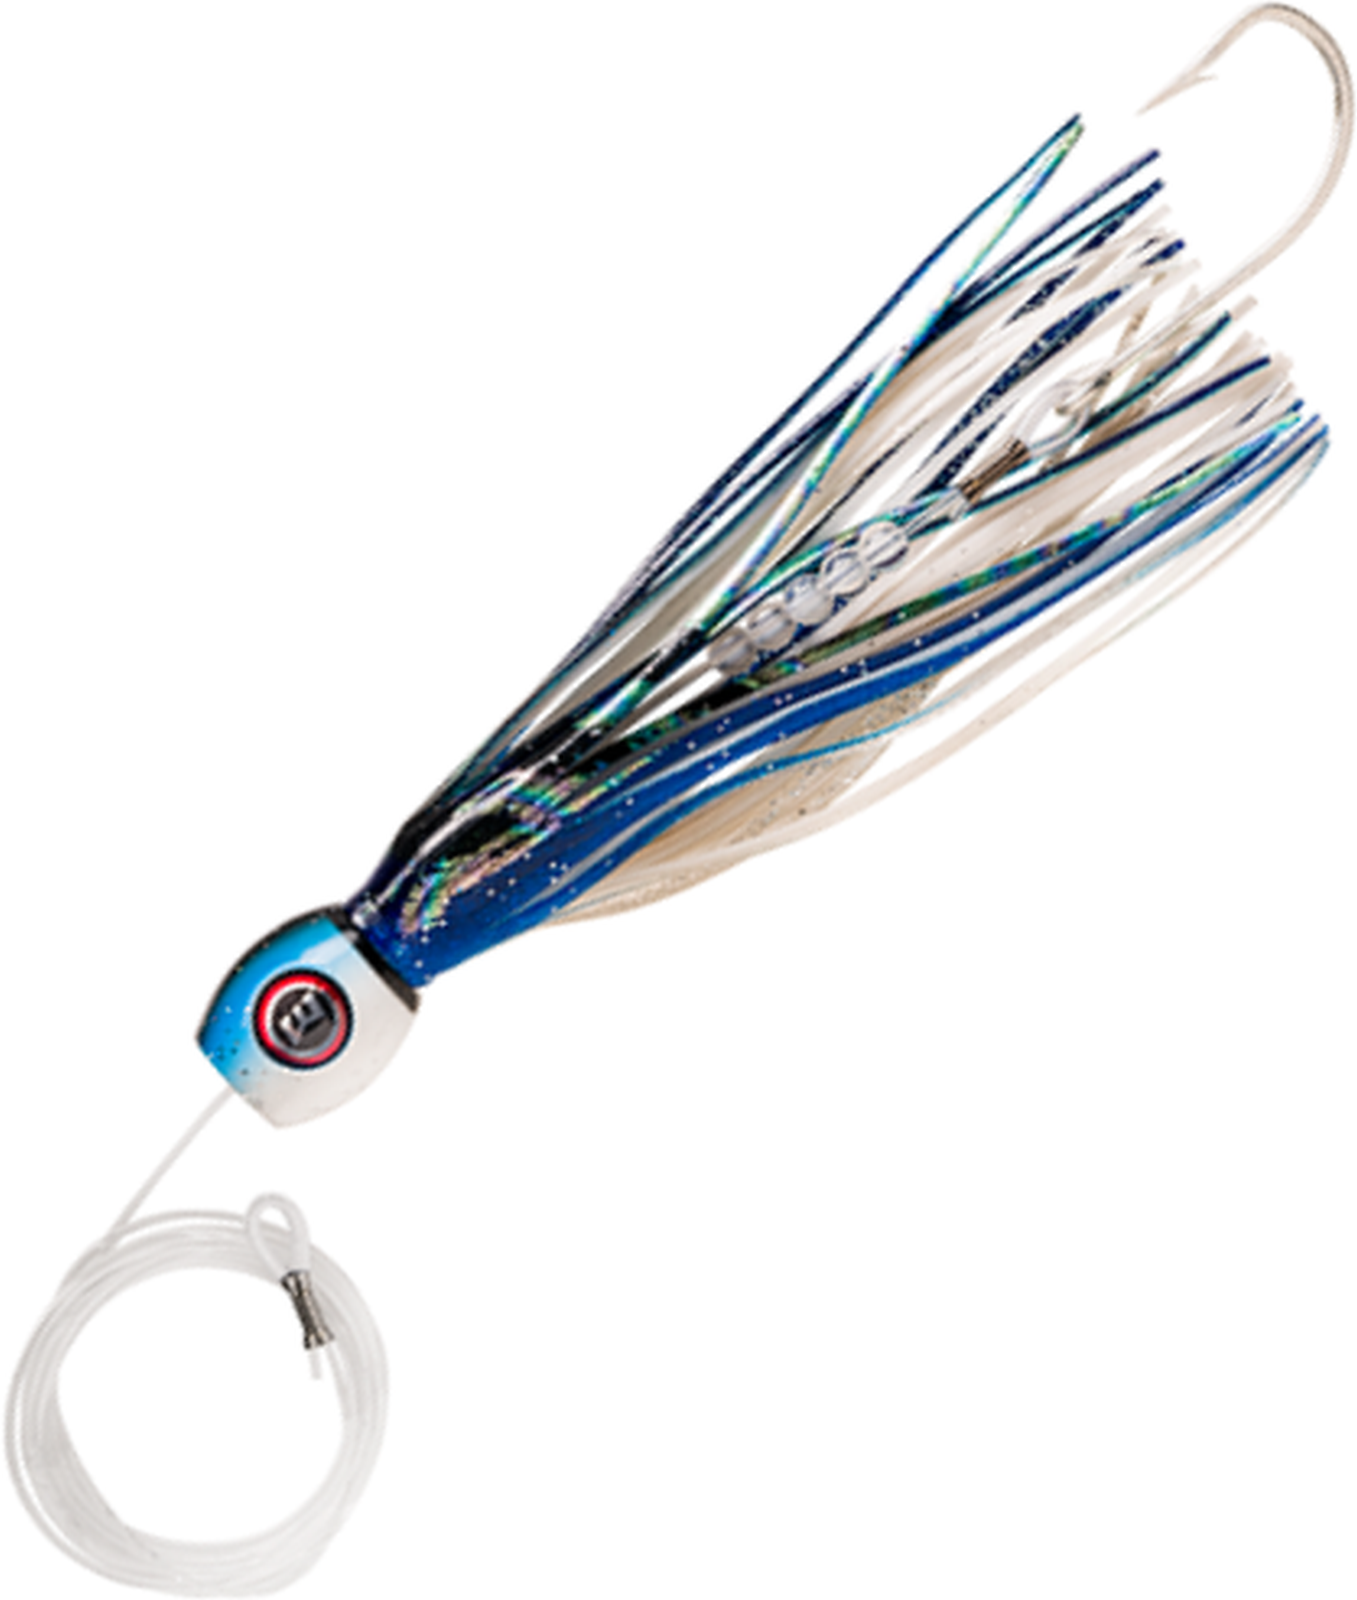 Williamson Lures Sailfish Catcher Rigged Lure 4.5 – Anglerpower Fishing  Tackle